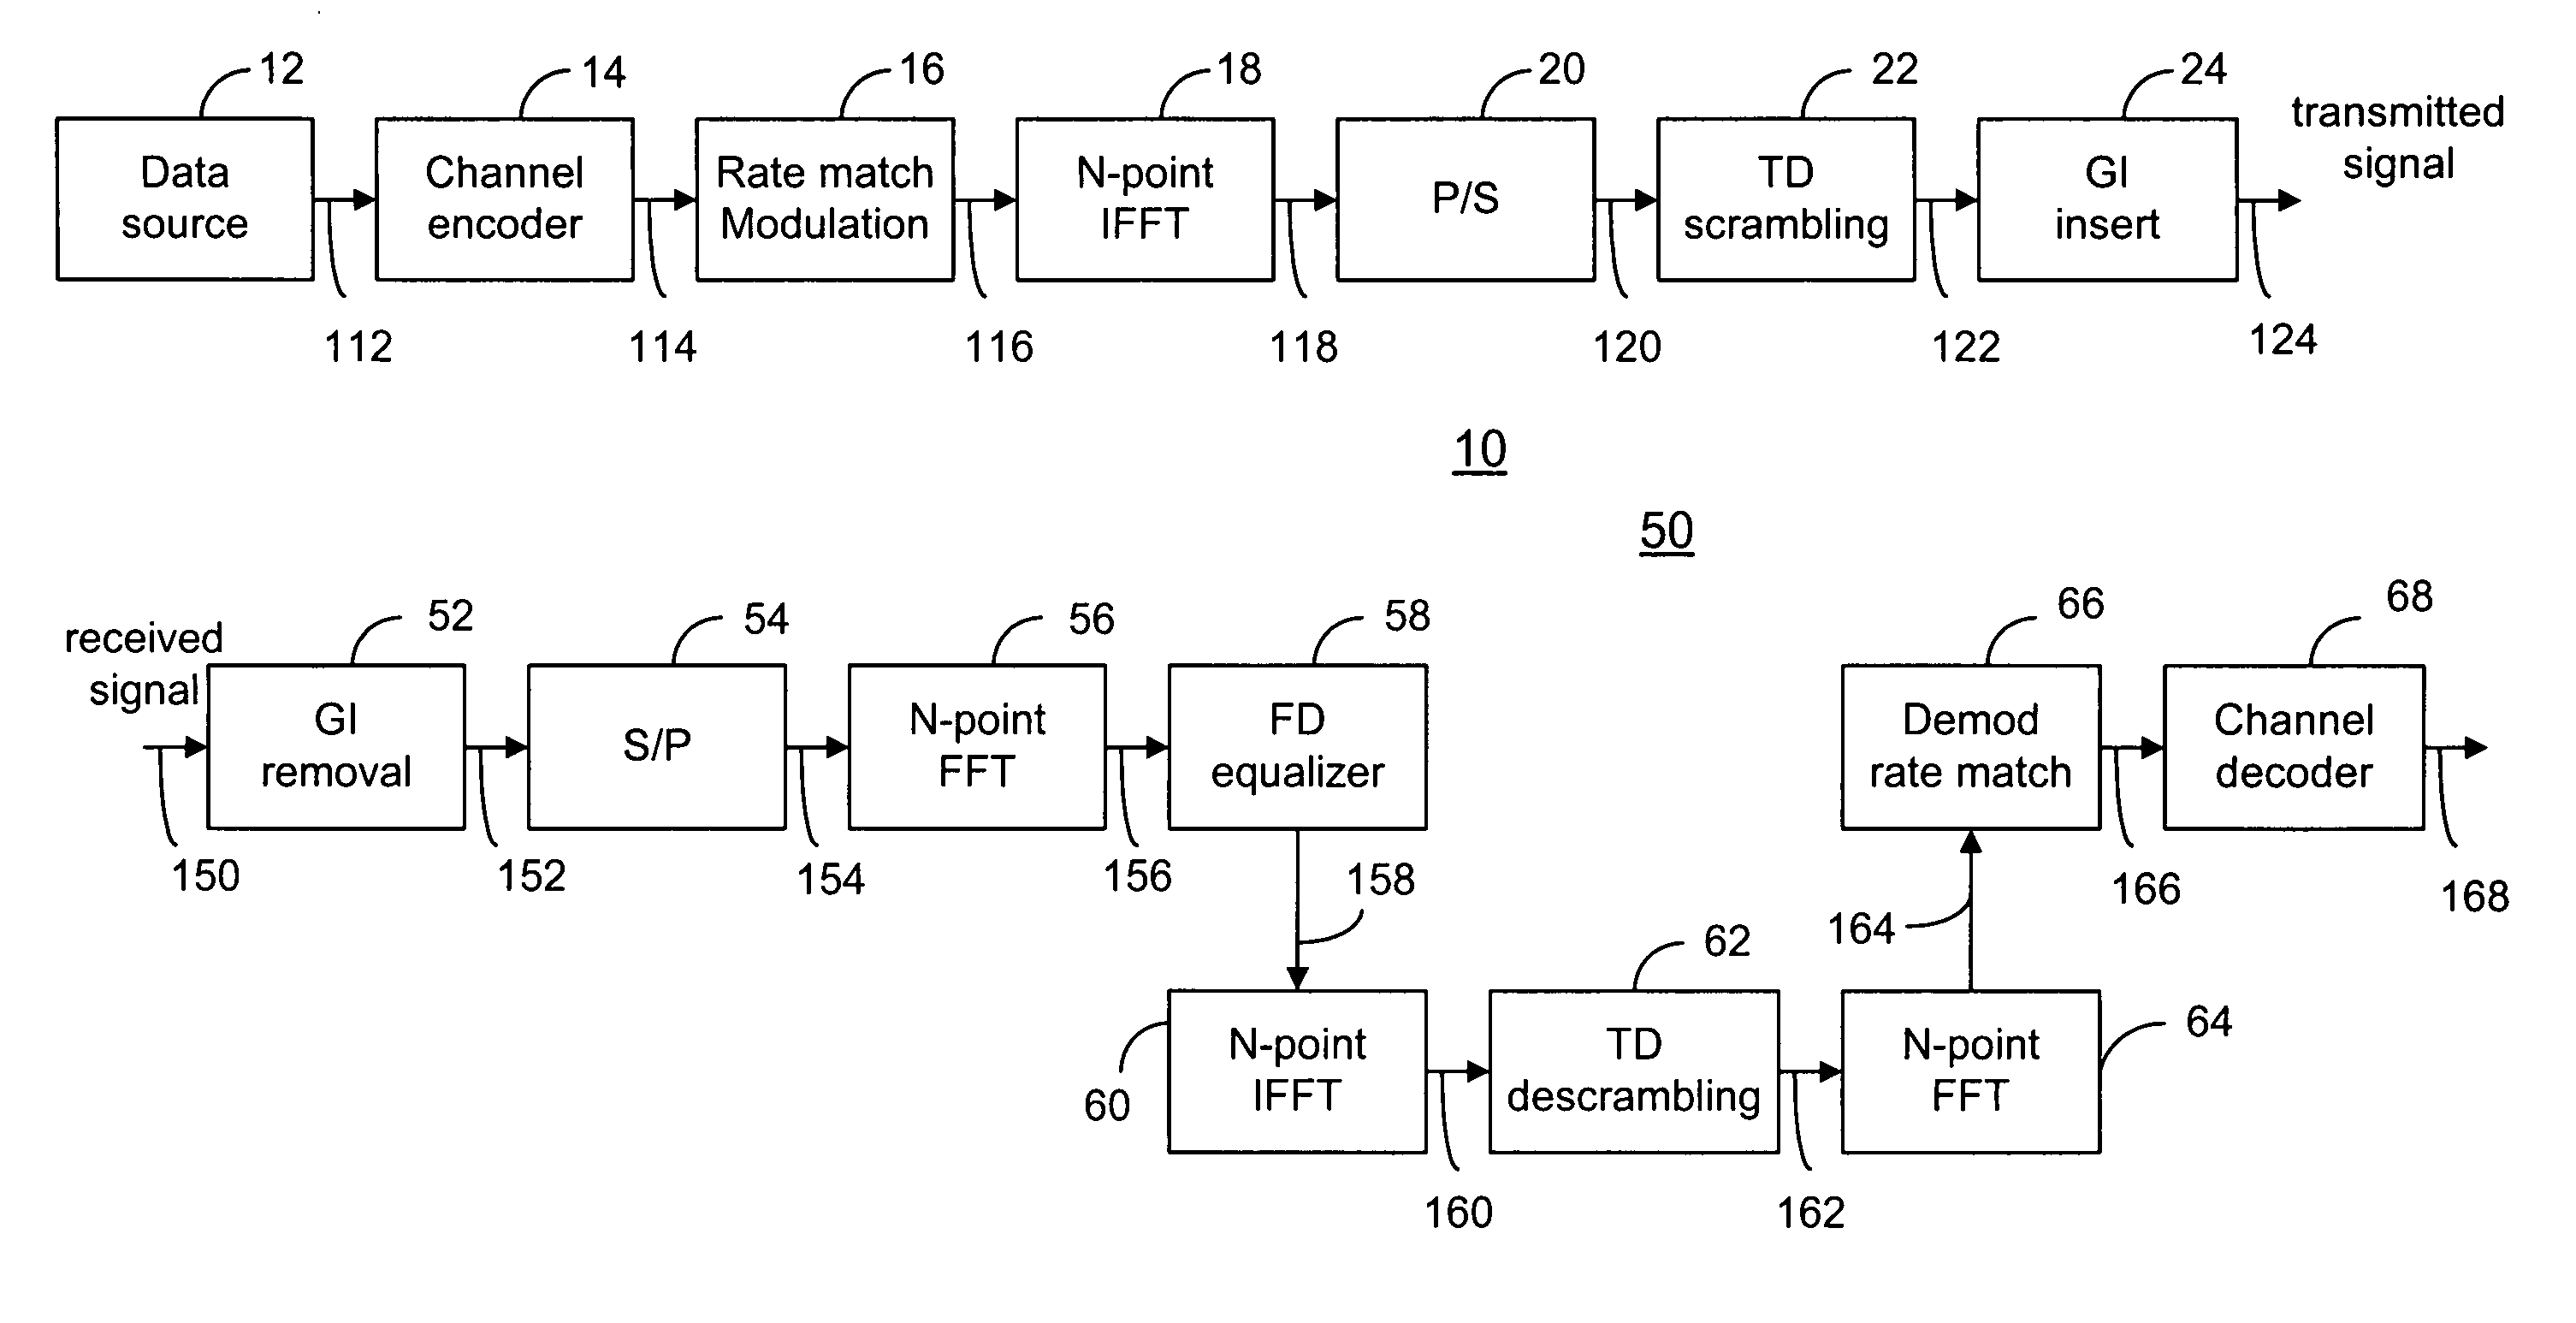 OFDM transceiver structure with time-domain scrambling